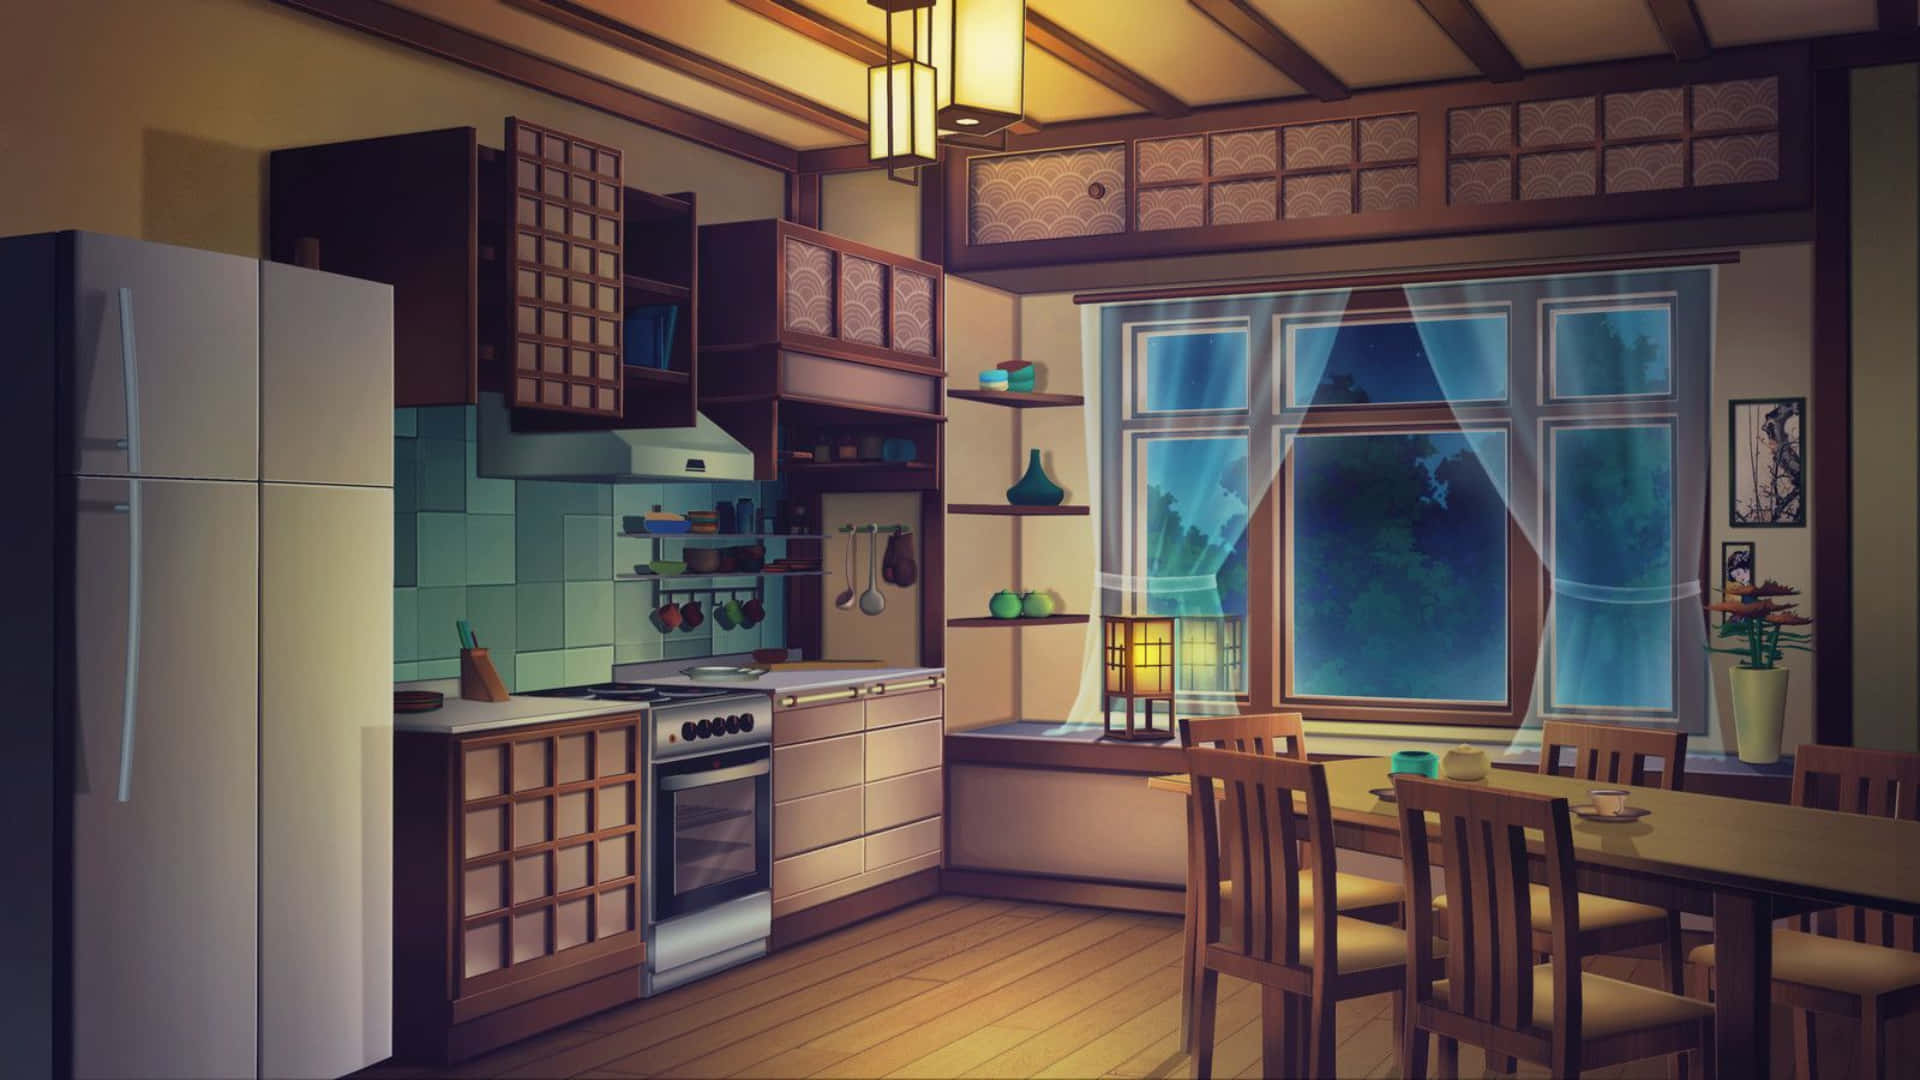 Download 1920x1080 Night Time Kitchen Background  Wallpaperscom